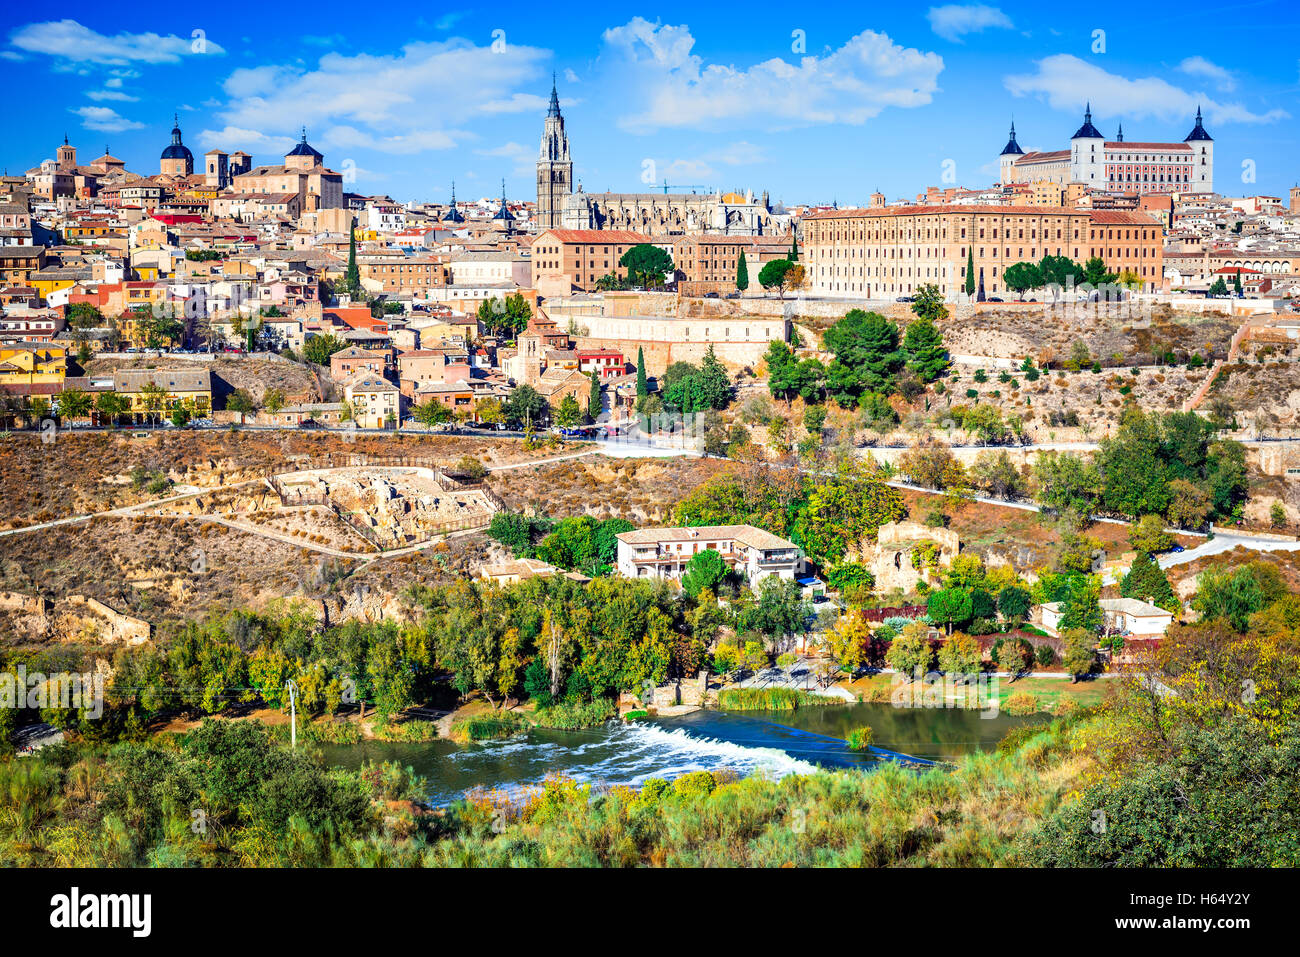 Toledo, Spain. Alcazar and the ancient city on a hill over the Tagus River, Castilla la Mancha medieval attraction of Espana. Stock Photo